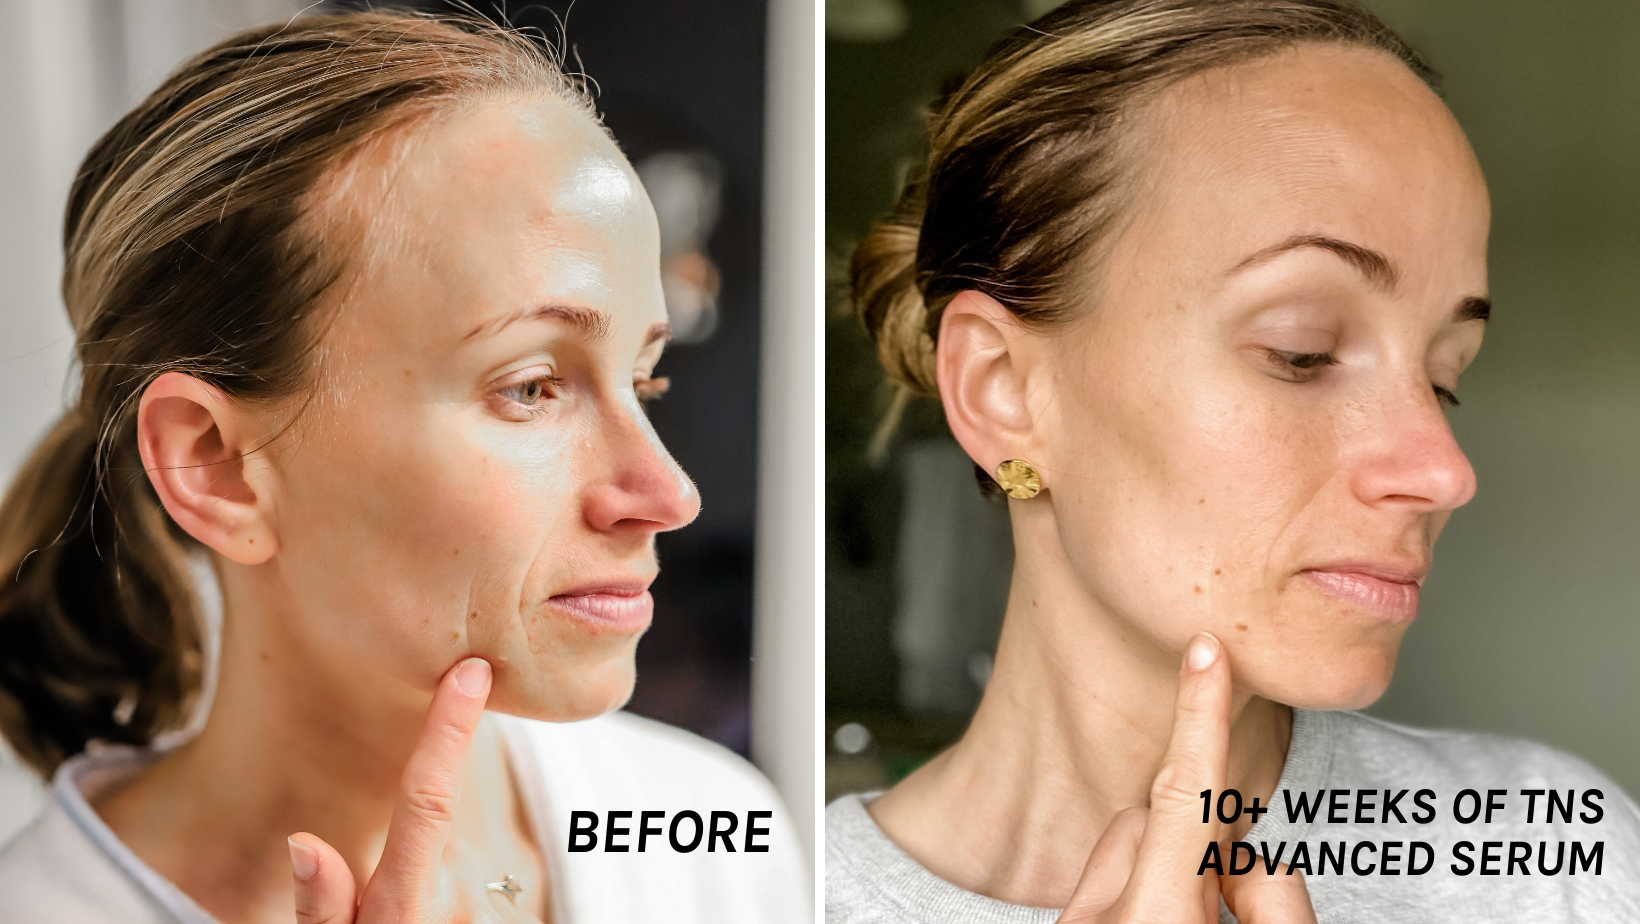 TeriLyn Adams showing skin before and after using SkinMedica TNS Advanced Serum